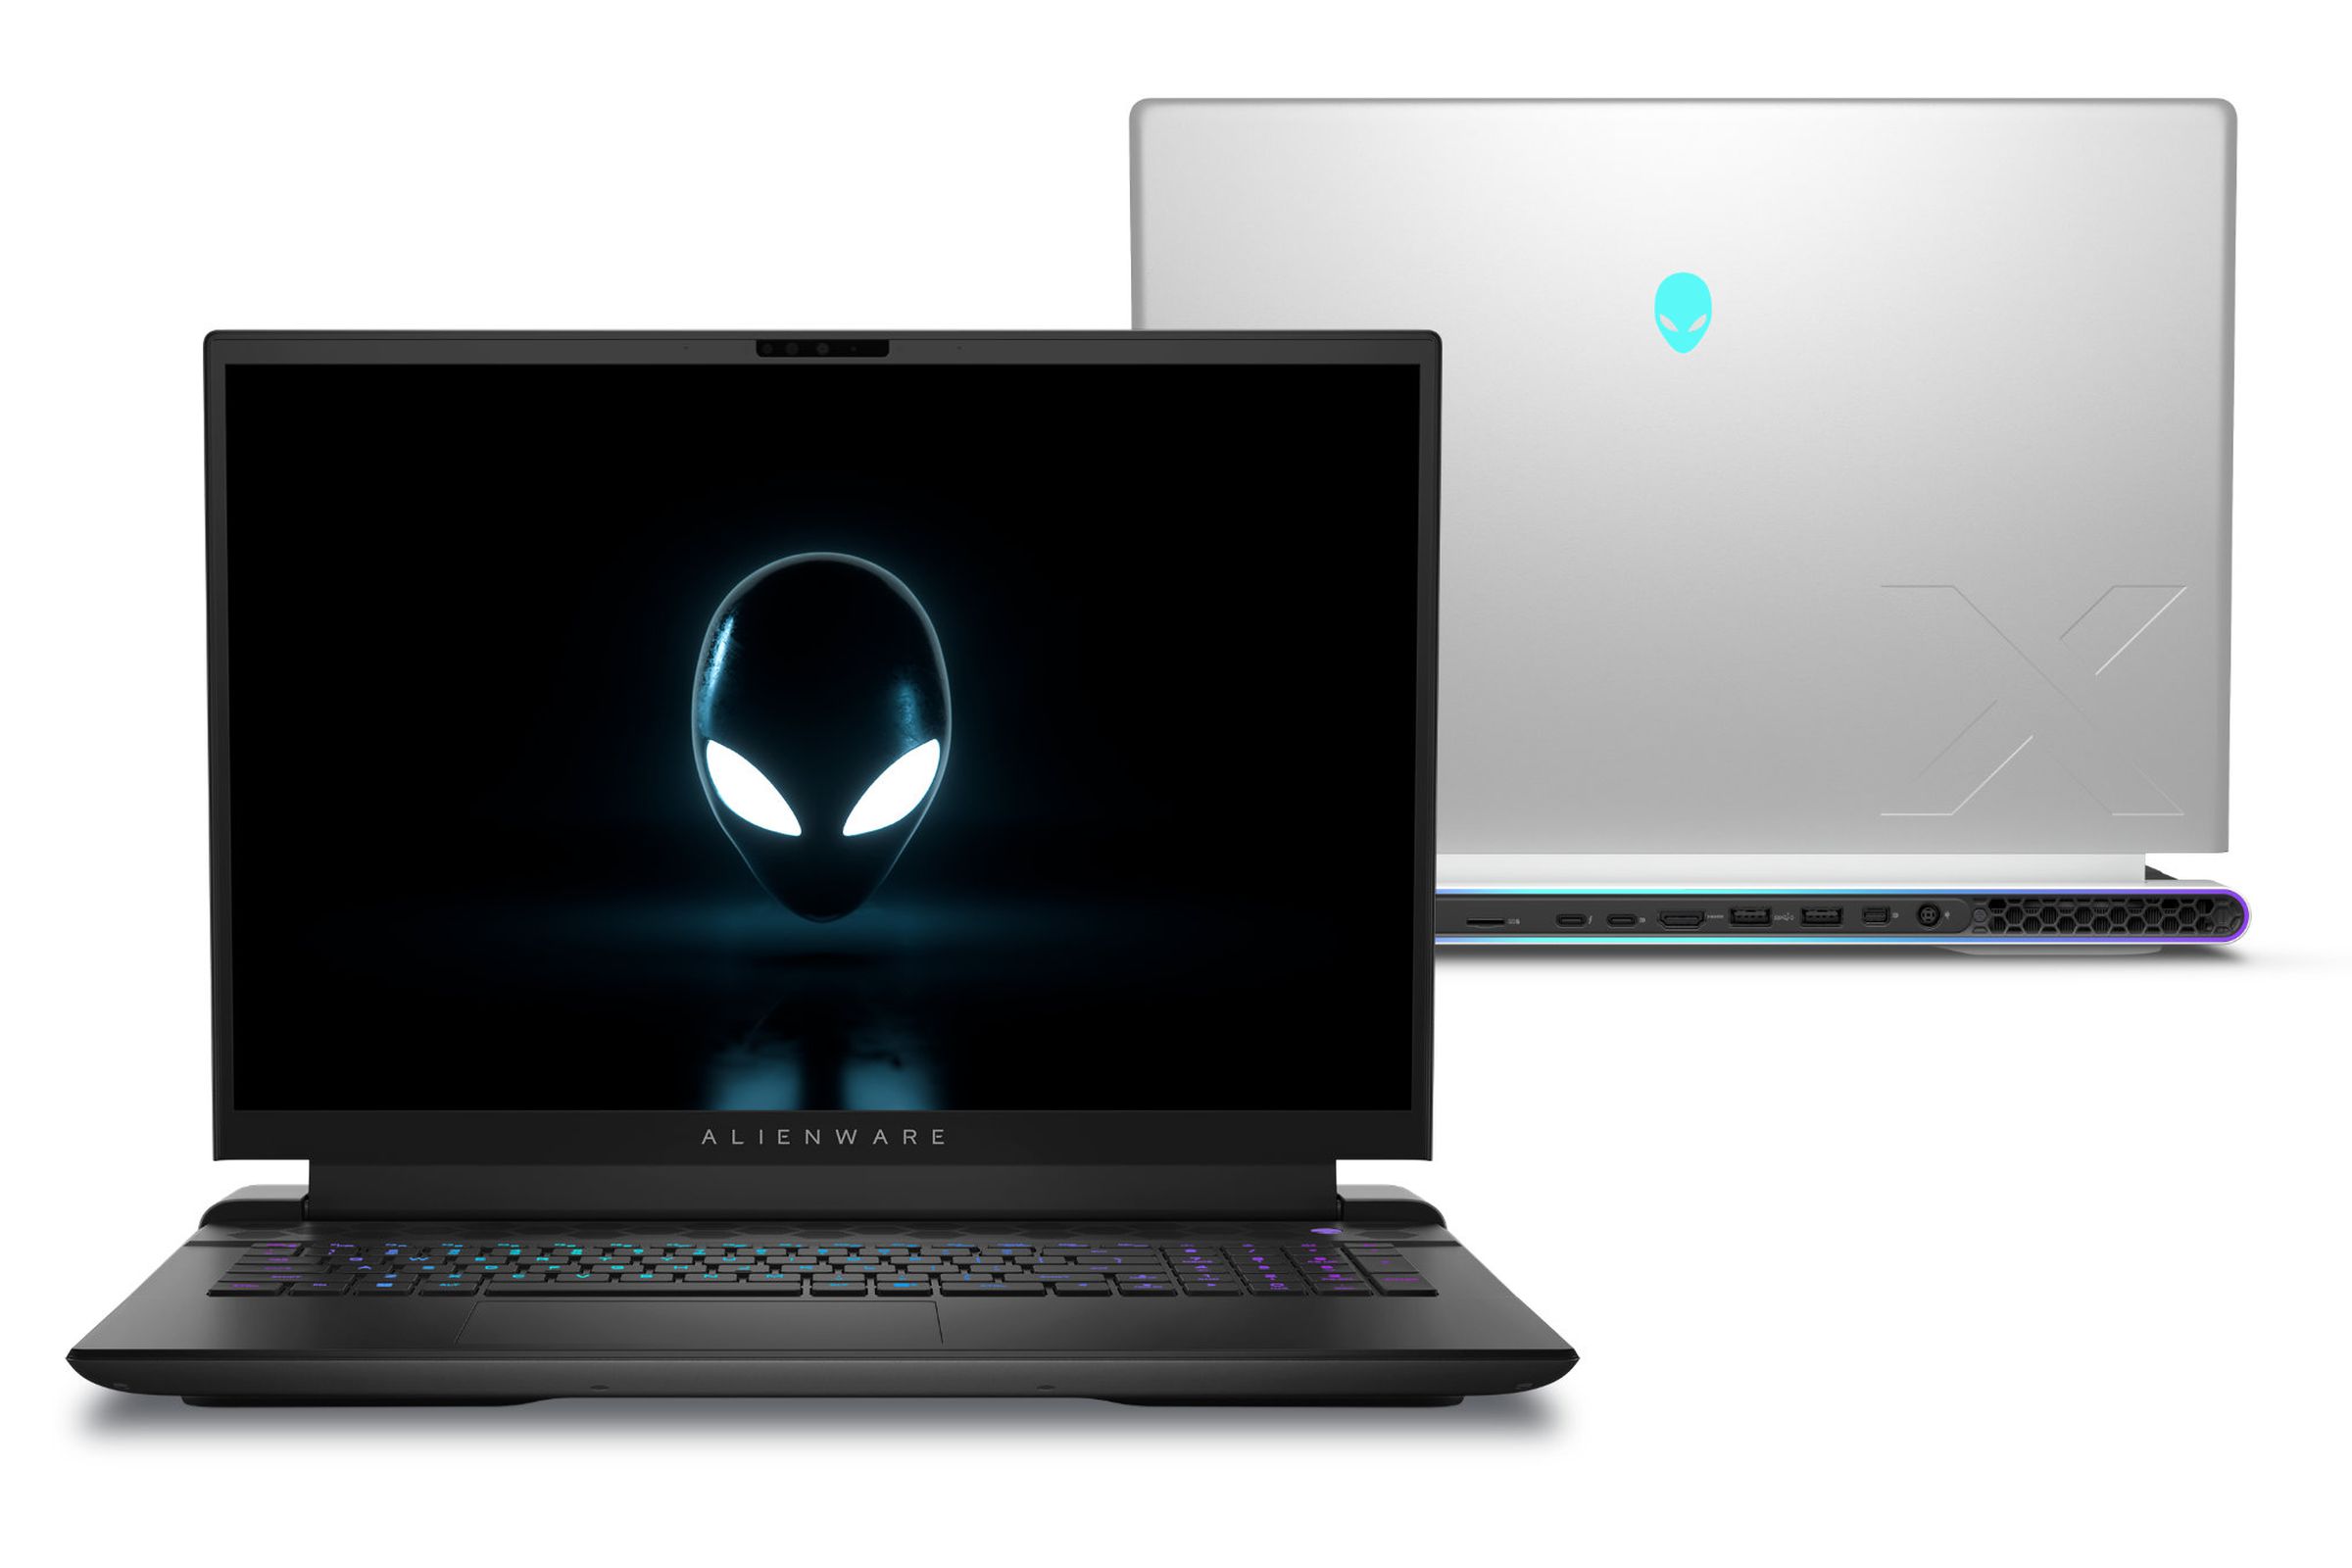 The Alienware M18 gaming laptop with its display showing the Alienware logo.